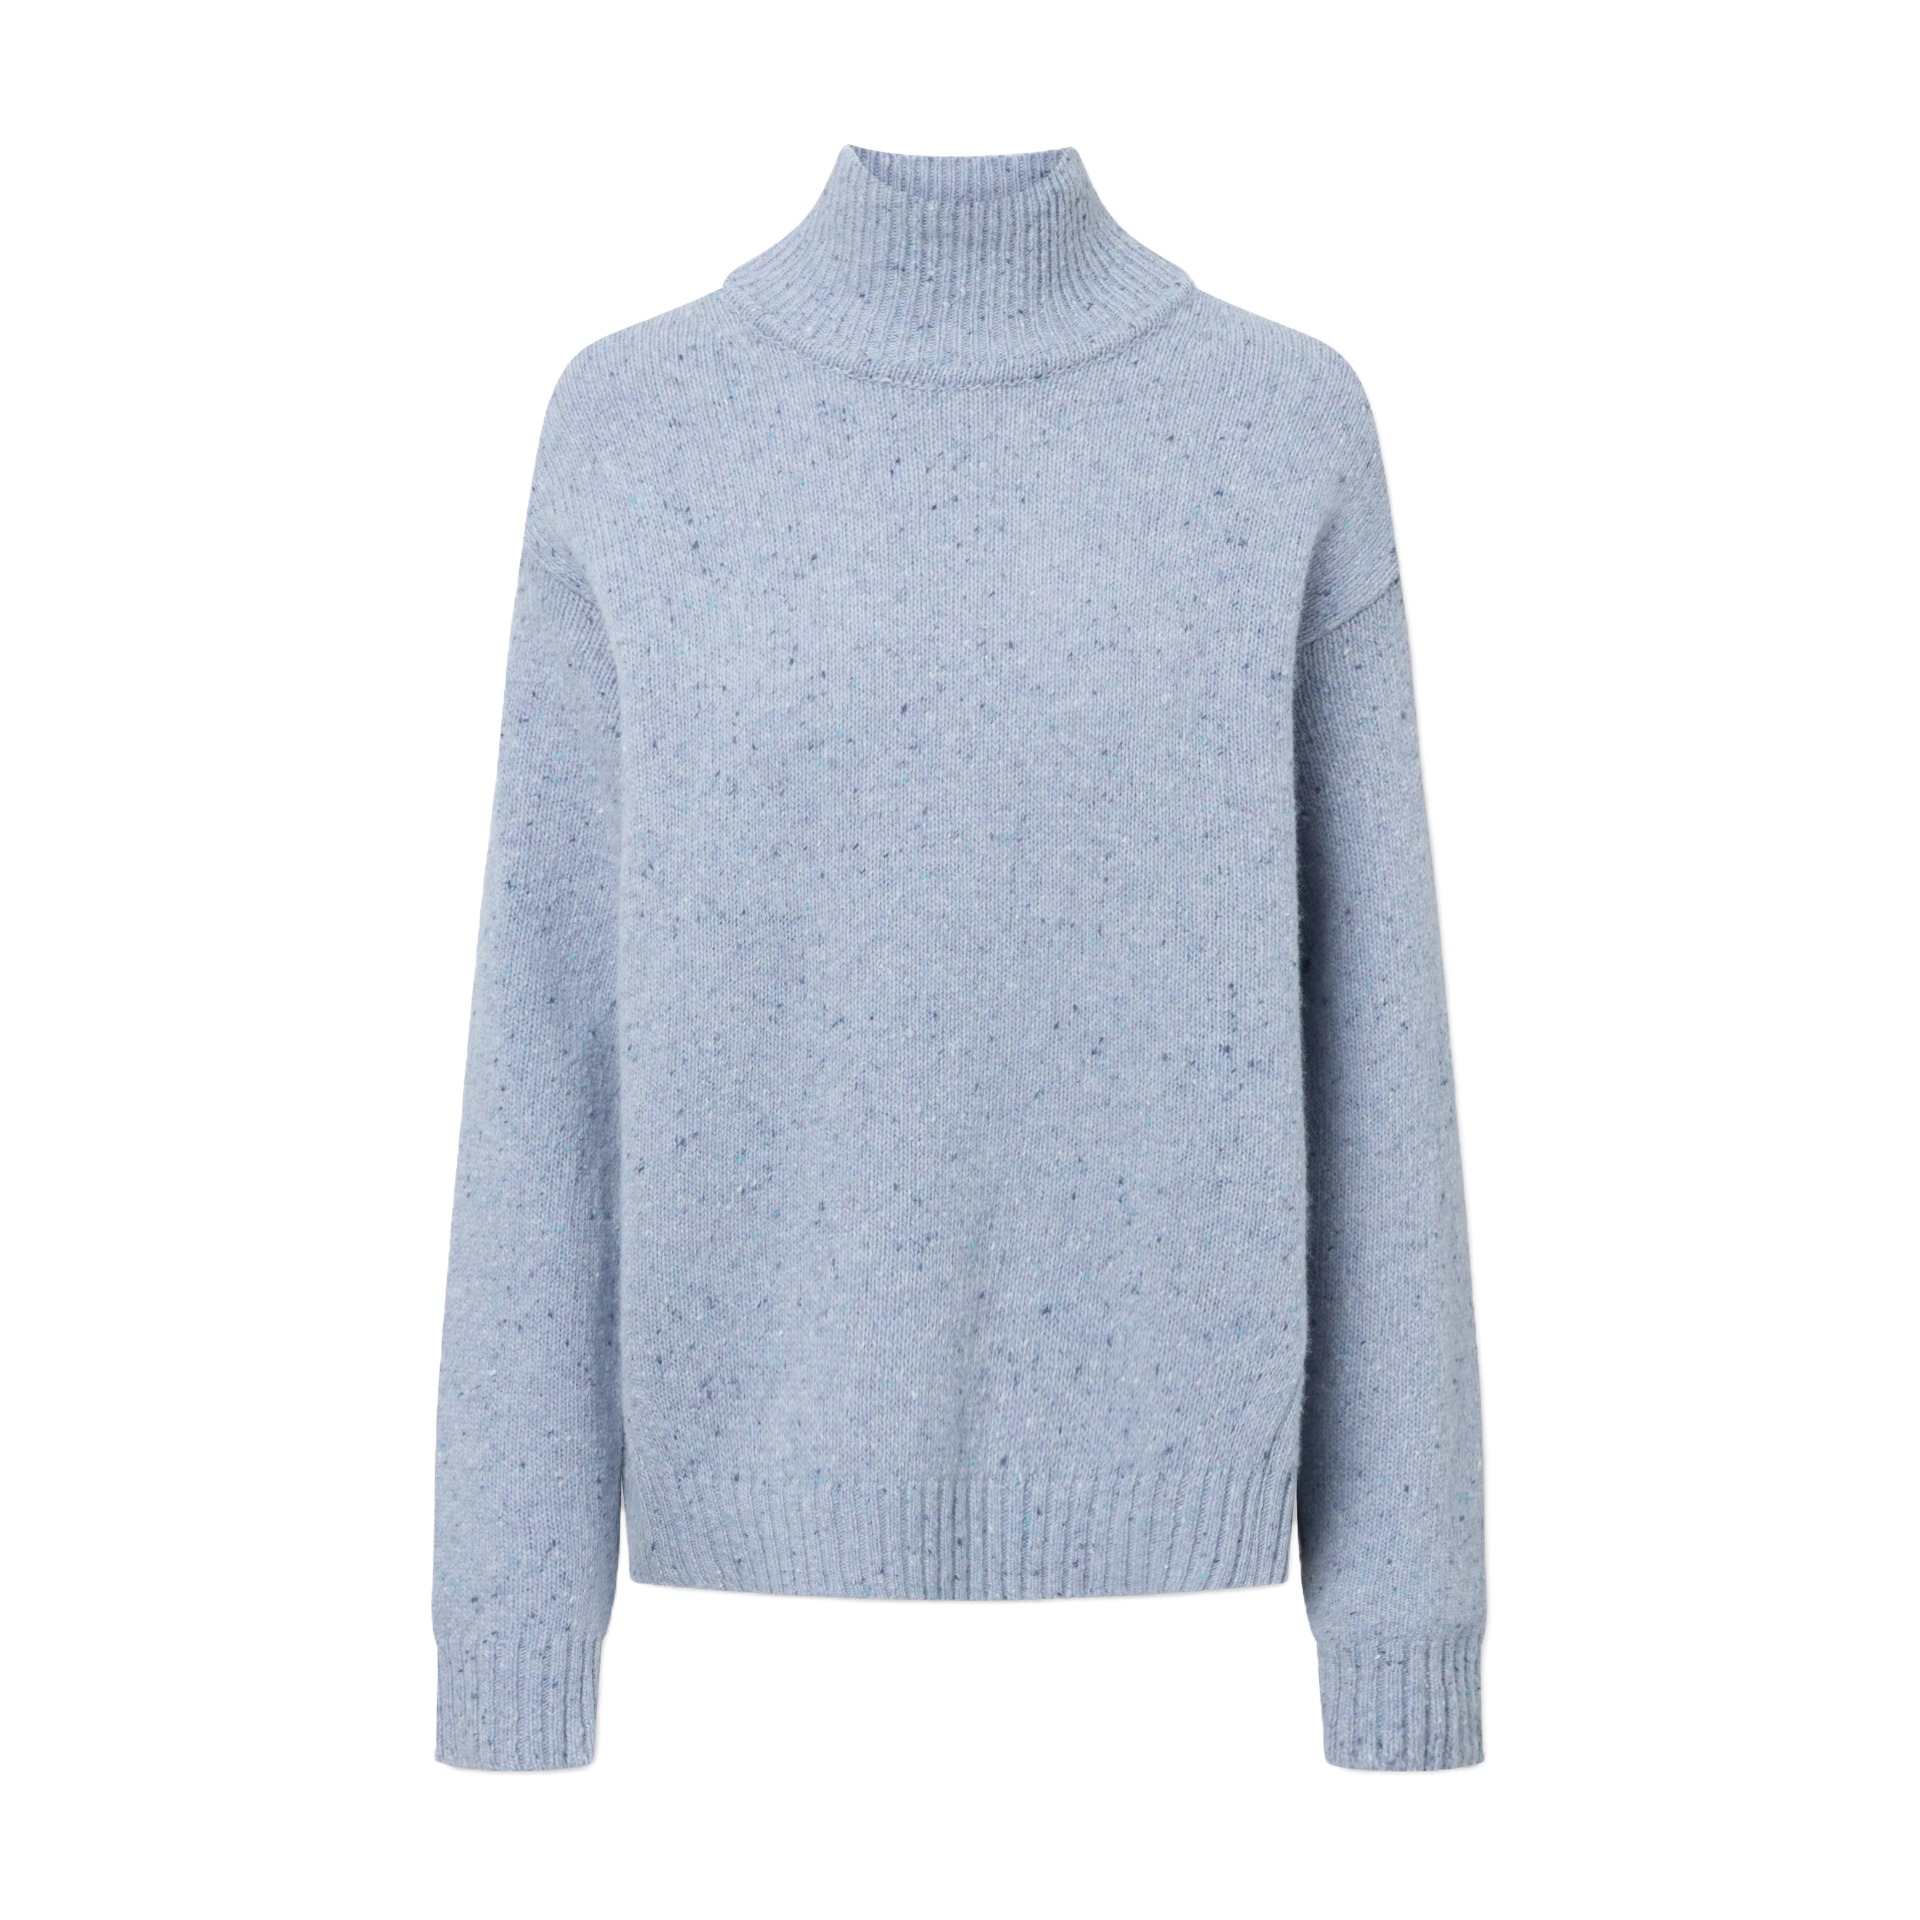 High Quality Women’s Wool Blended Jersey Stitching High Neck Jumper Top Sweater